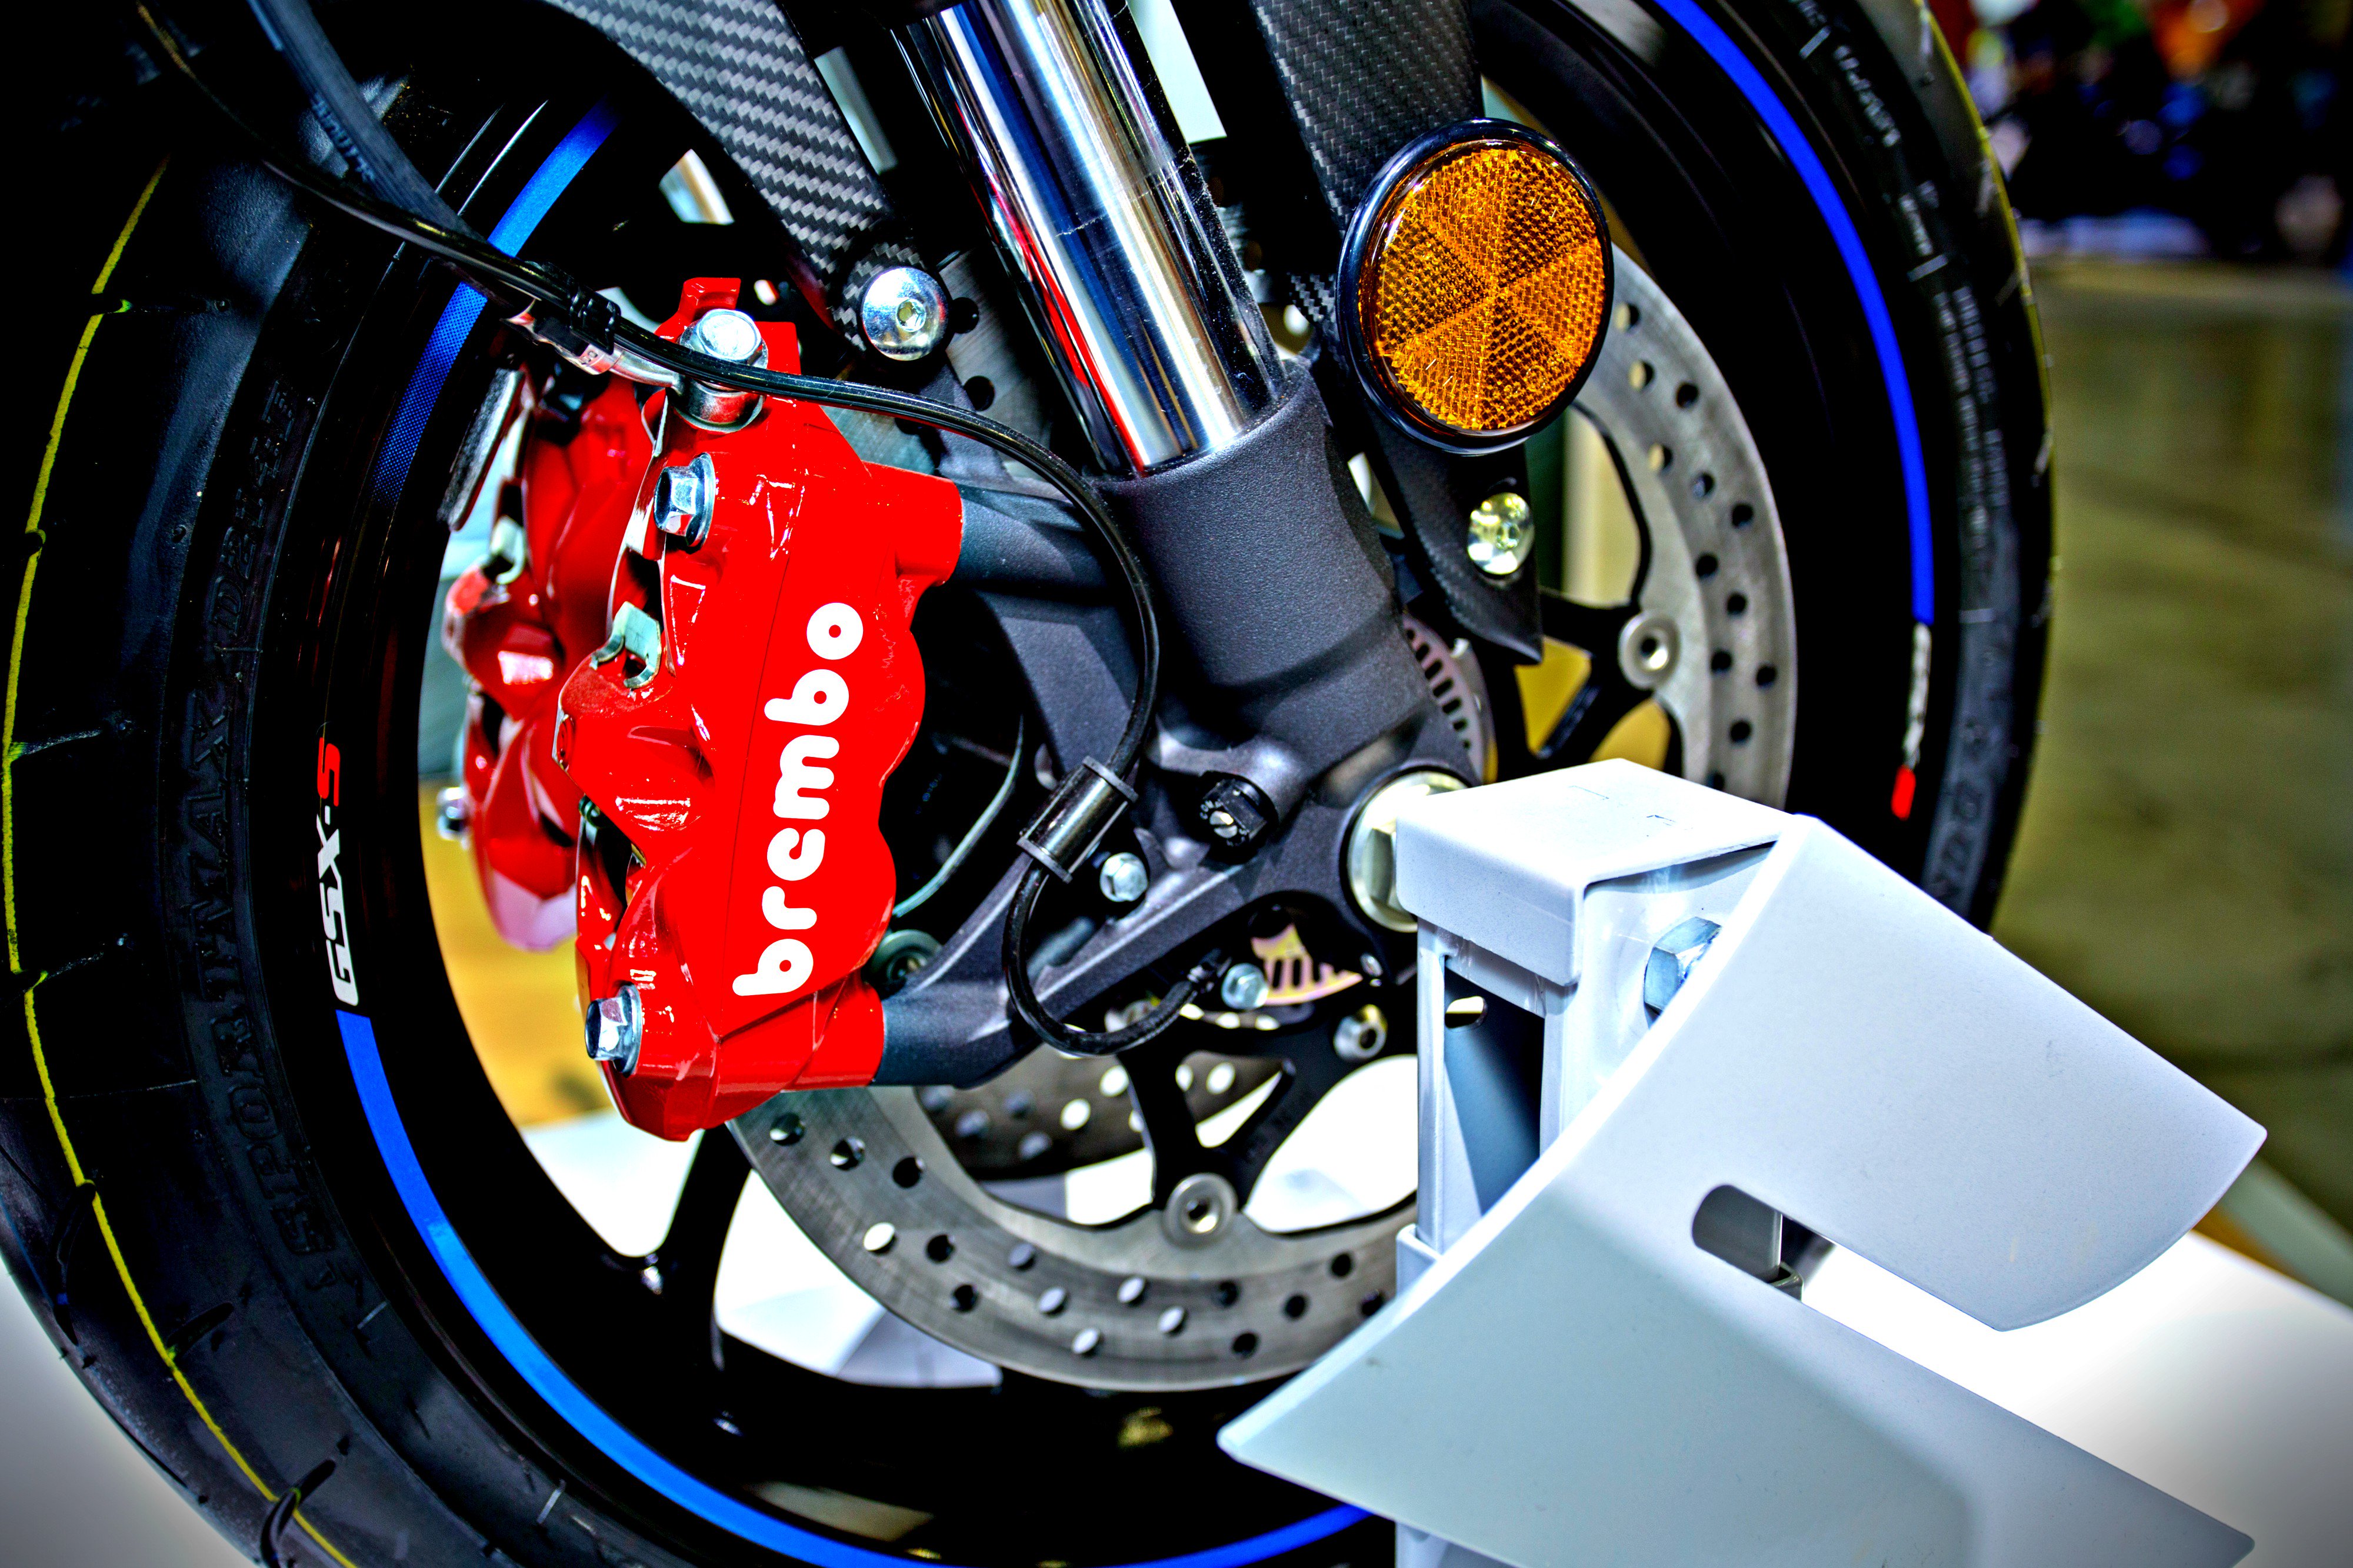 Brembo on Twitter: "Which brake system can feature the Suzuki GSX-S 1000? A  red four pistons Brembo brake caliper! https://t.co/rzG0ddal82" / Twitter